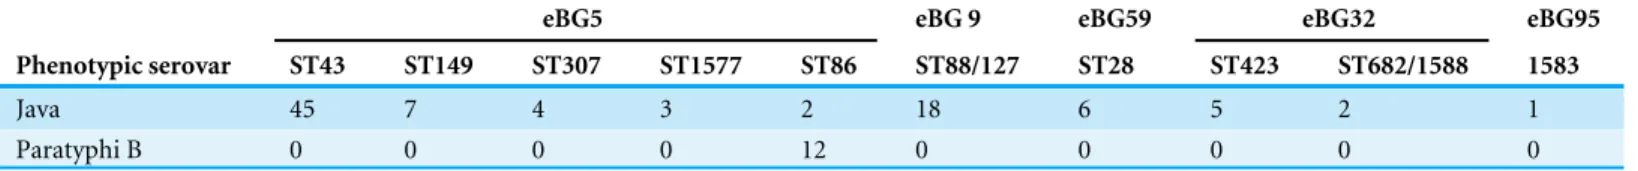 Table 2 Differences in ST between S. Java and S. Paratyphi B. S. Java isolates in this study belonged to a diverse range of eBGs and STs associated with S